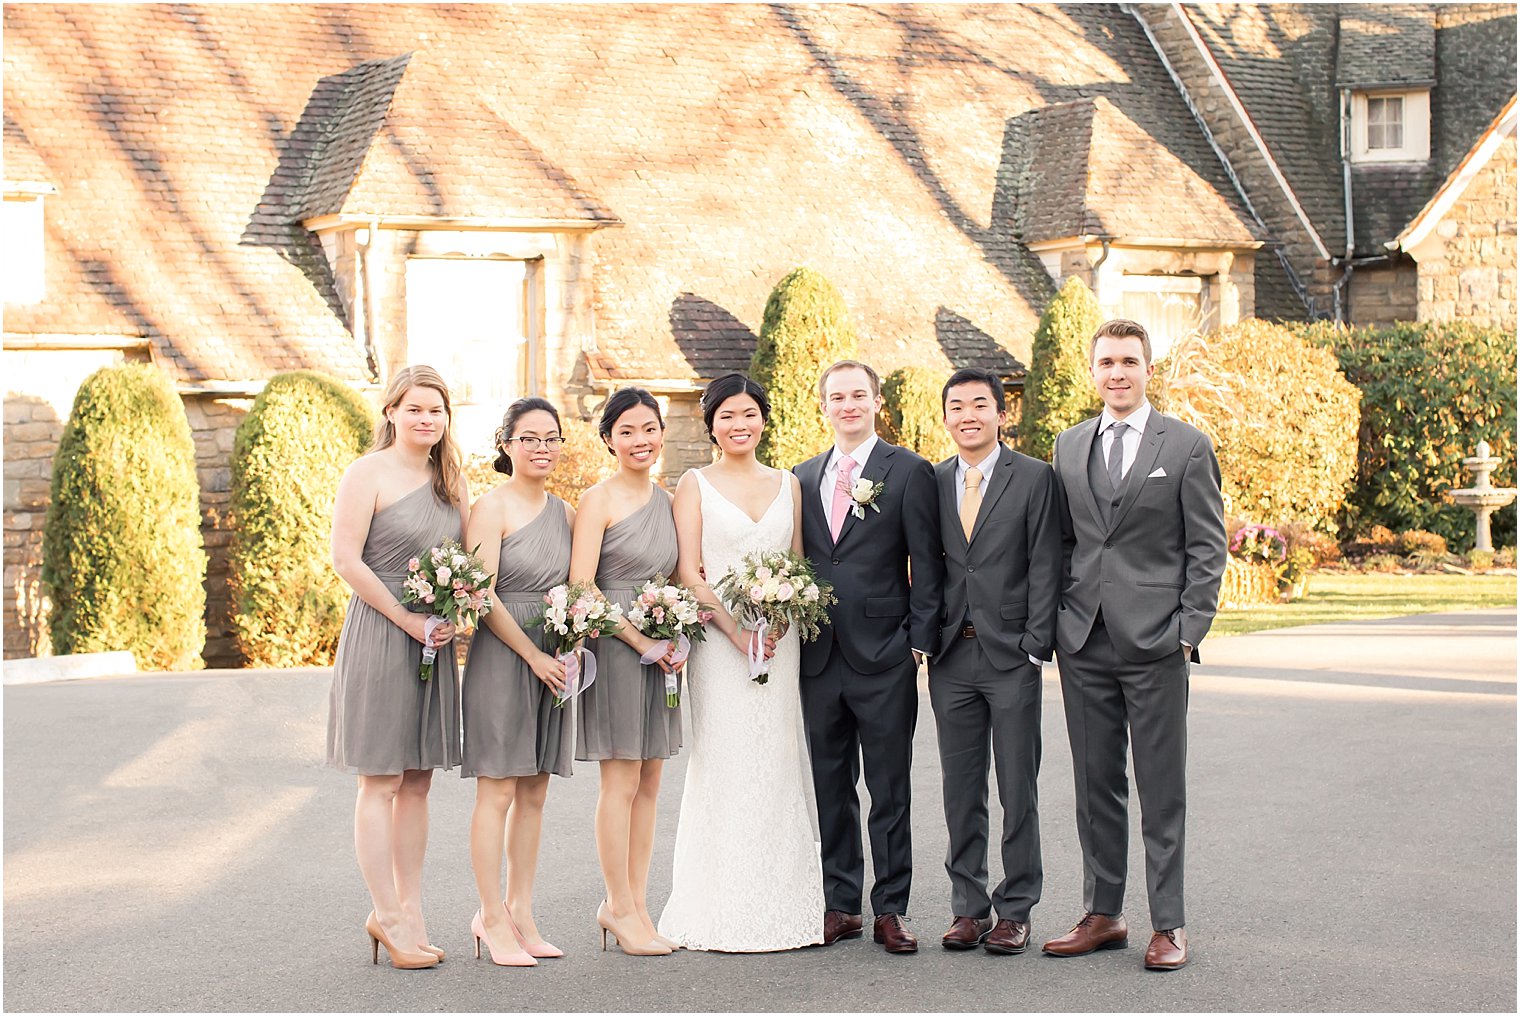 Bridal party in gray